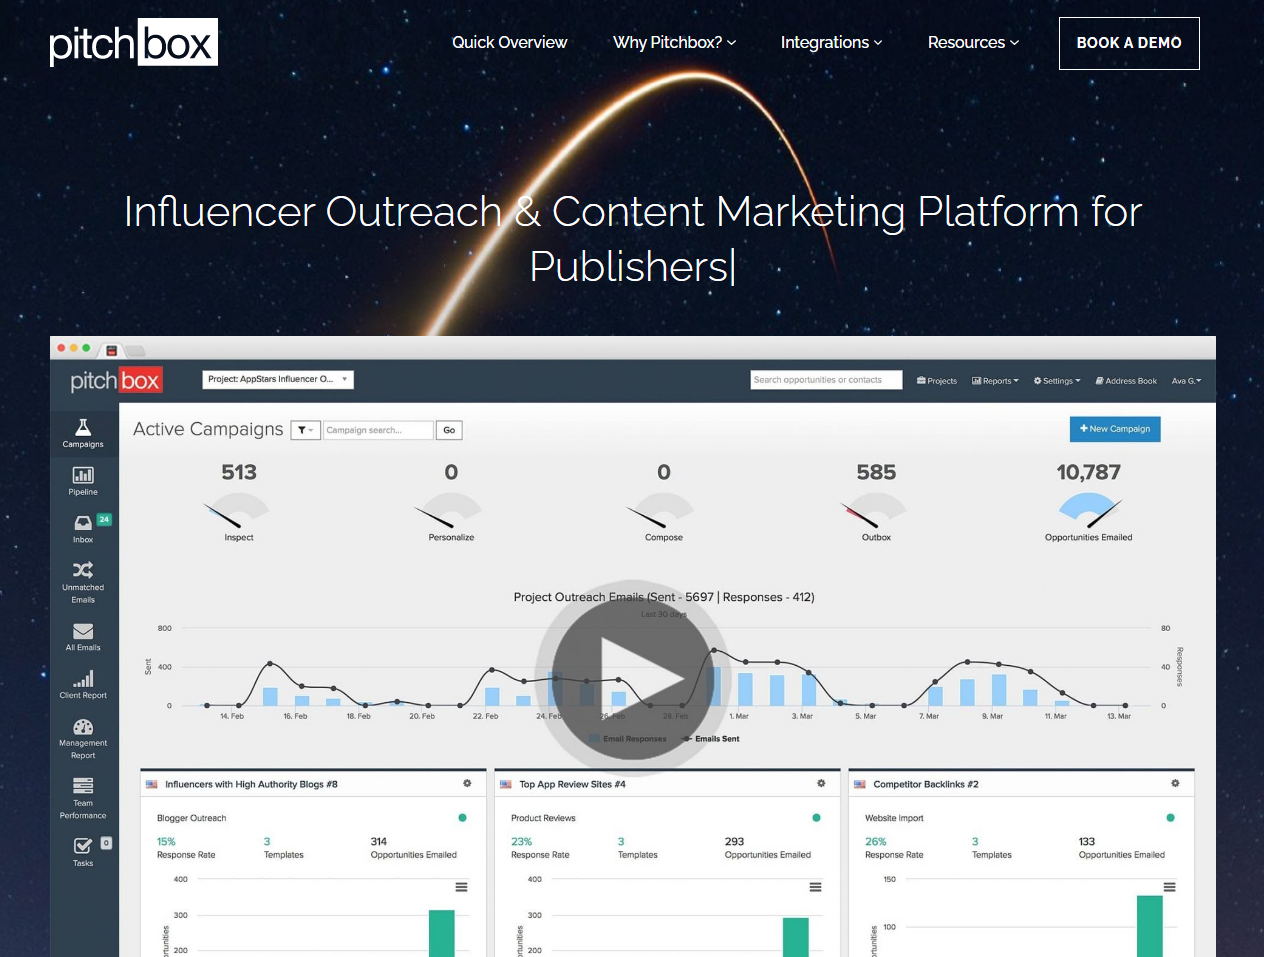 pitchbox, the best link building tool among the seo enterprise tools in this list